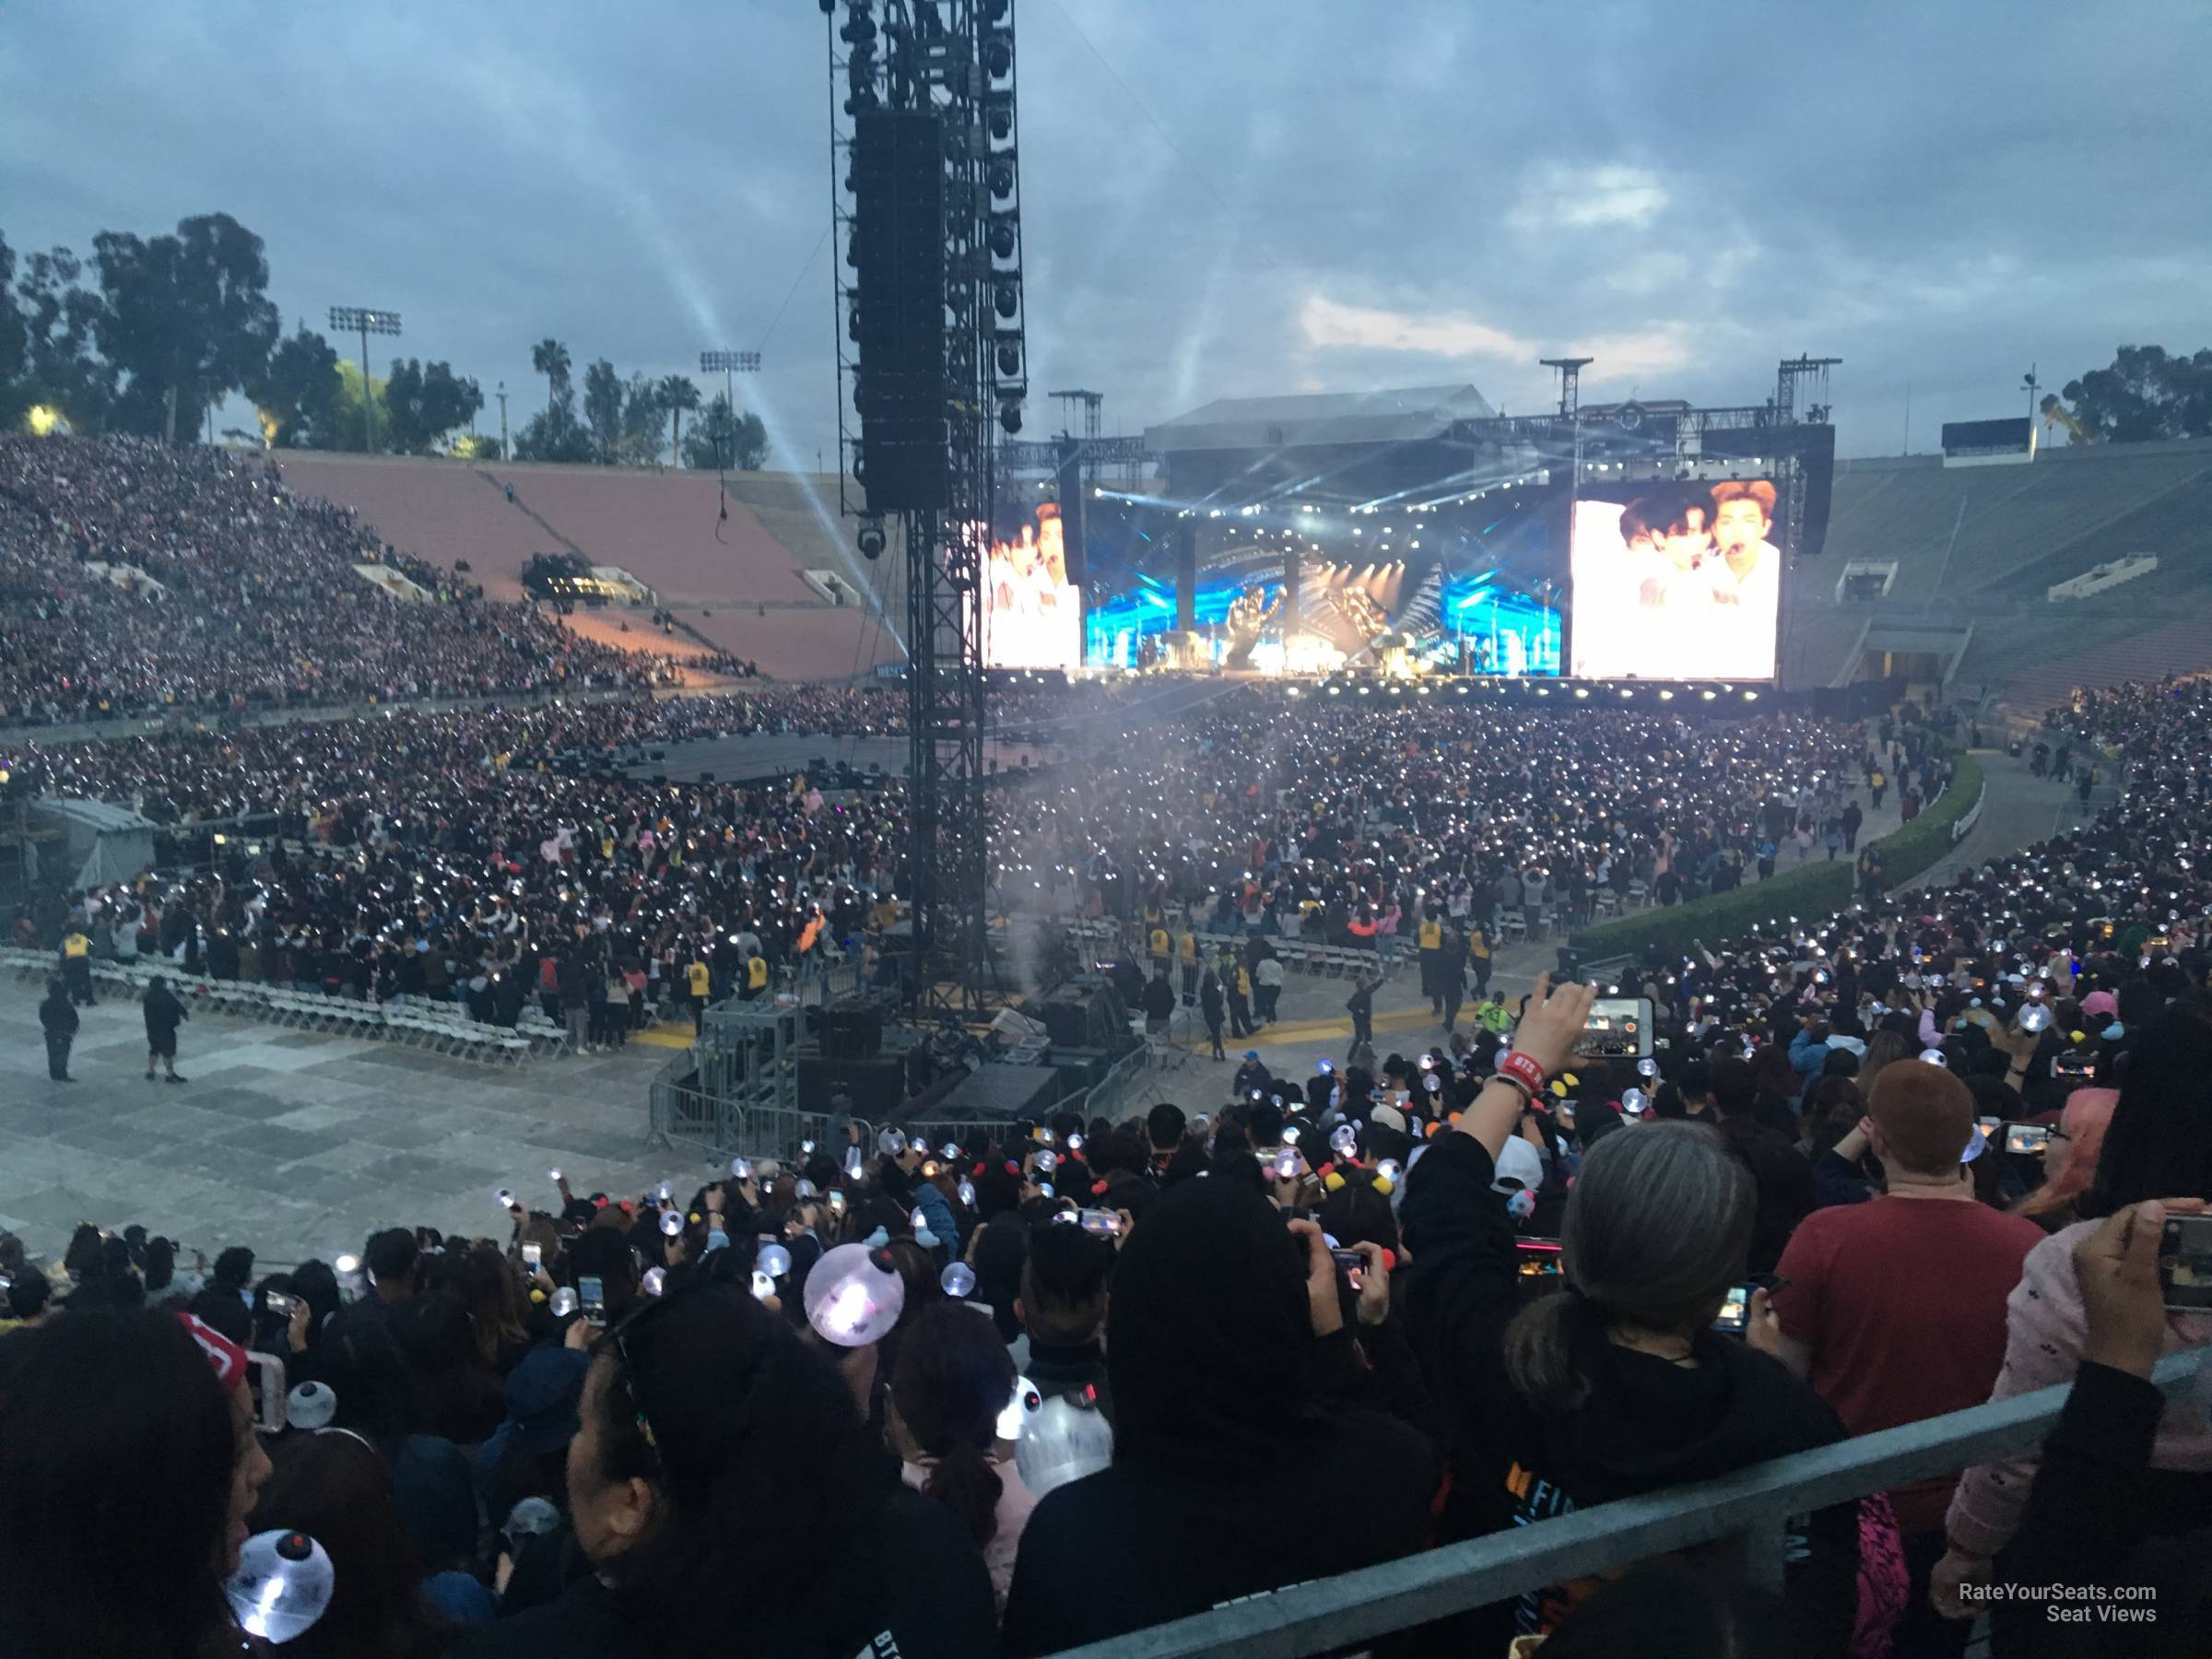 section 15, row 30 seat view  for concert - rose bowl stadium